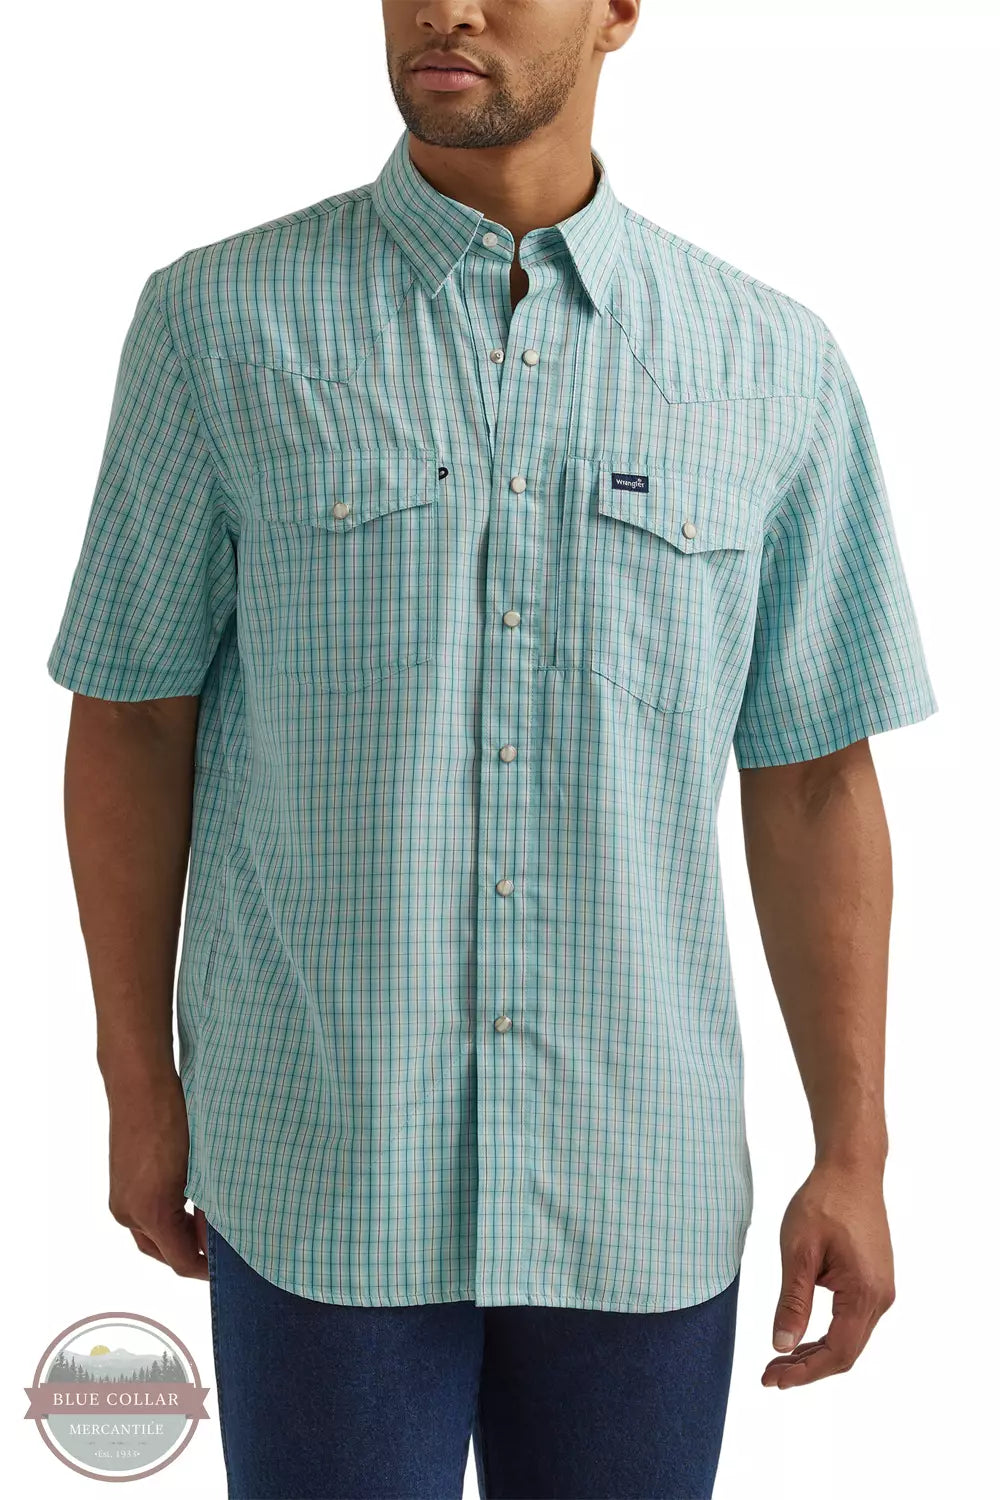 Wrangler 112344595 Performance Snap Shirt in Sky Blue Plaid Front View